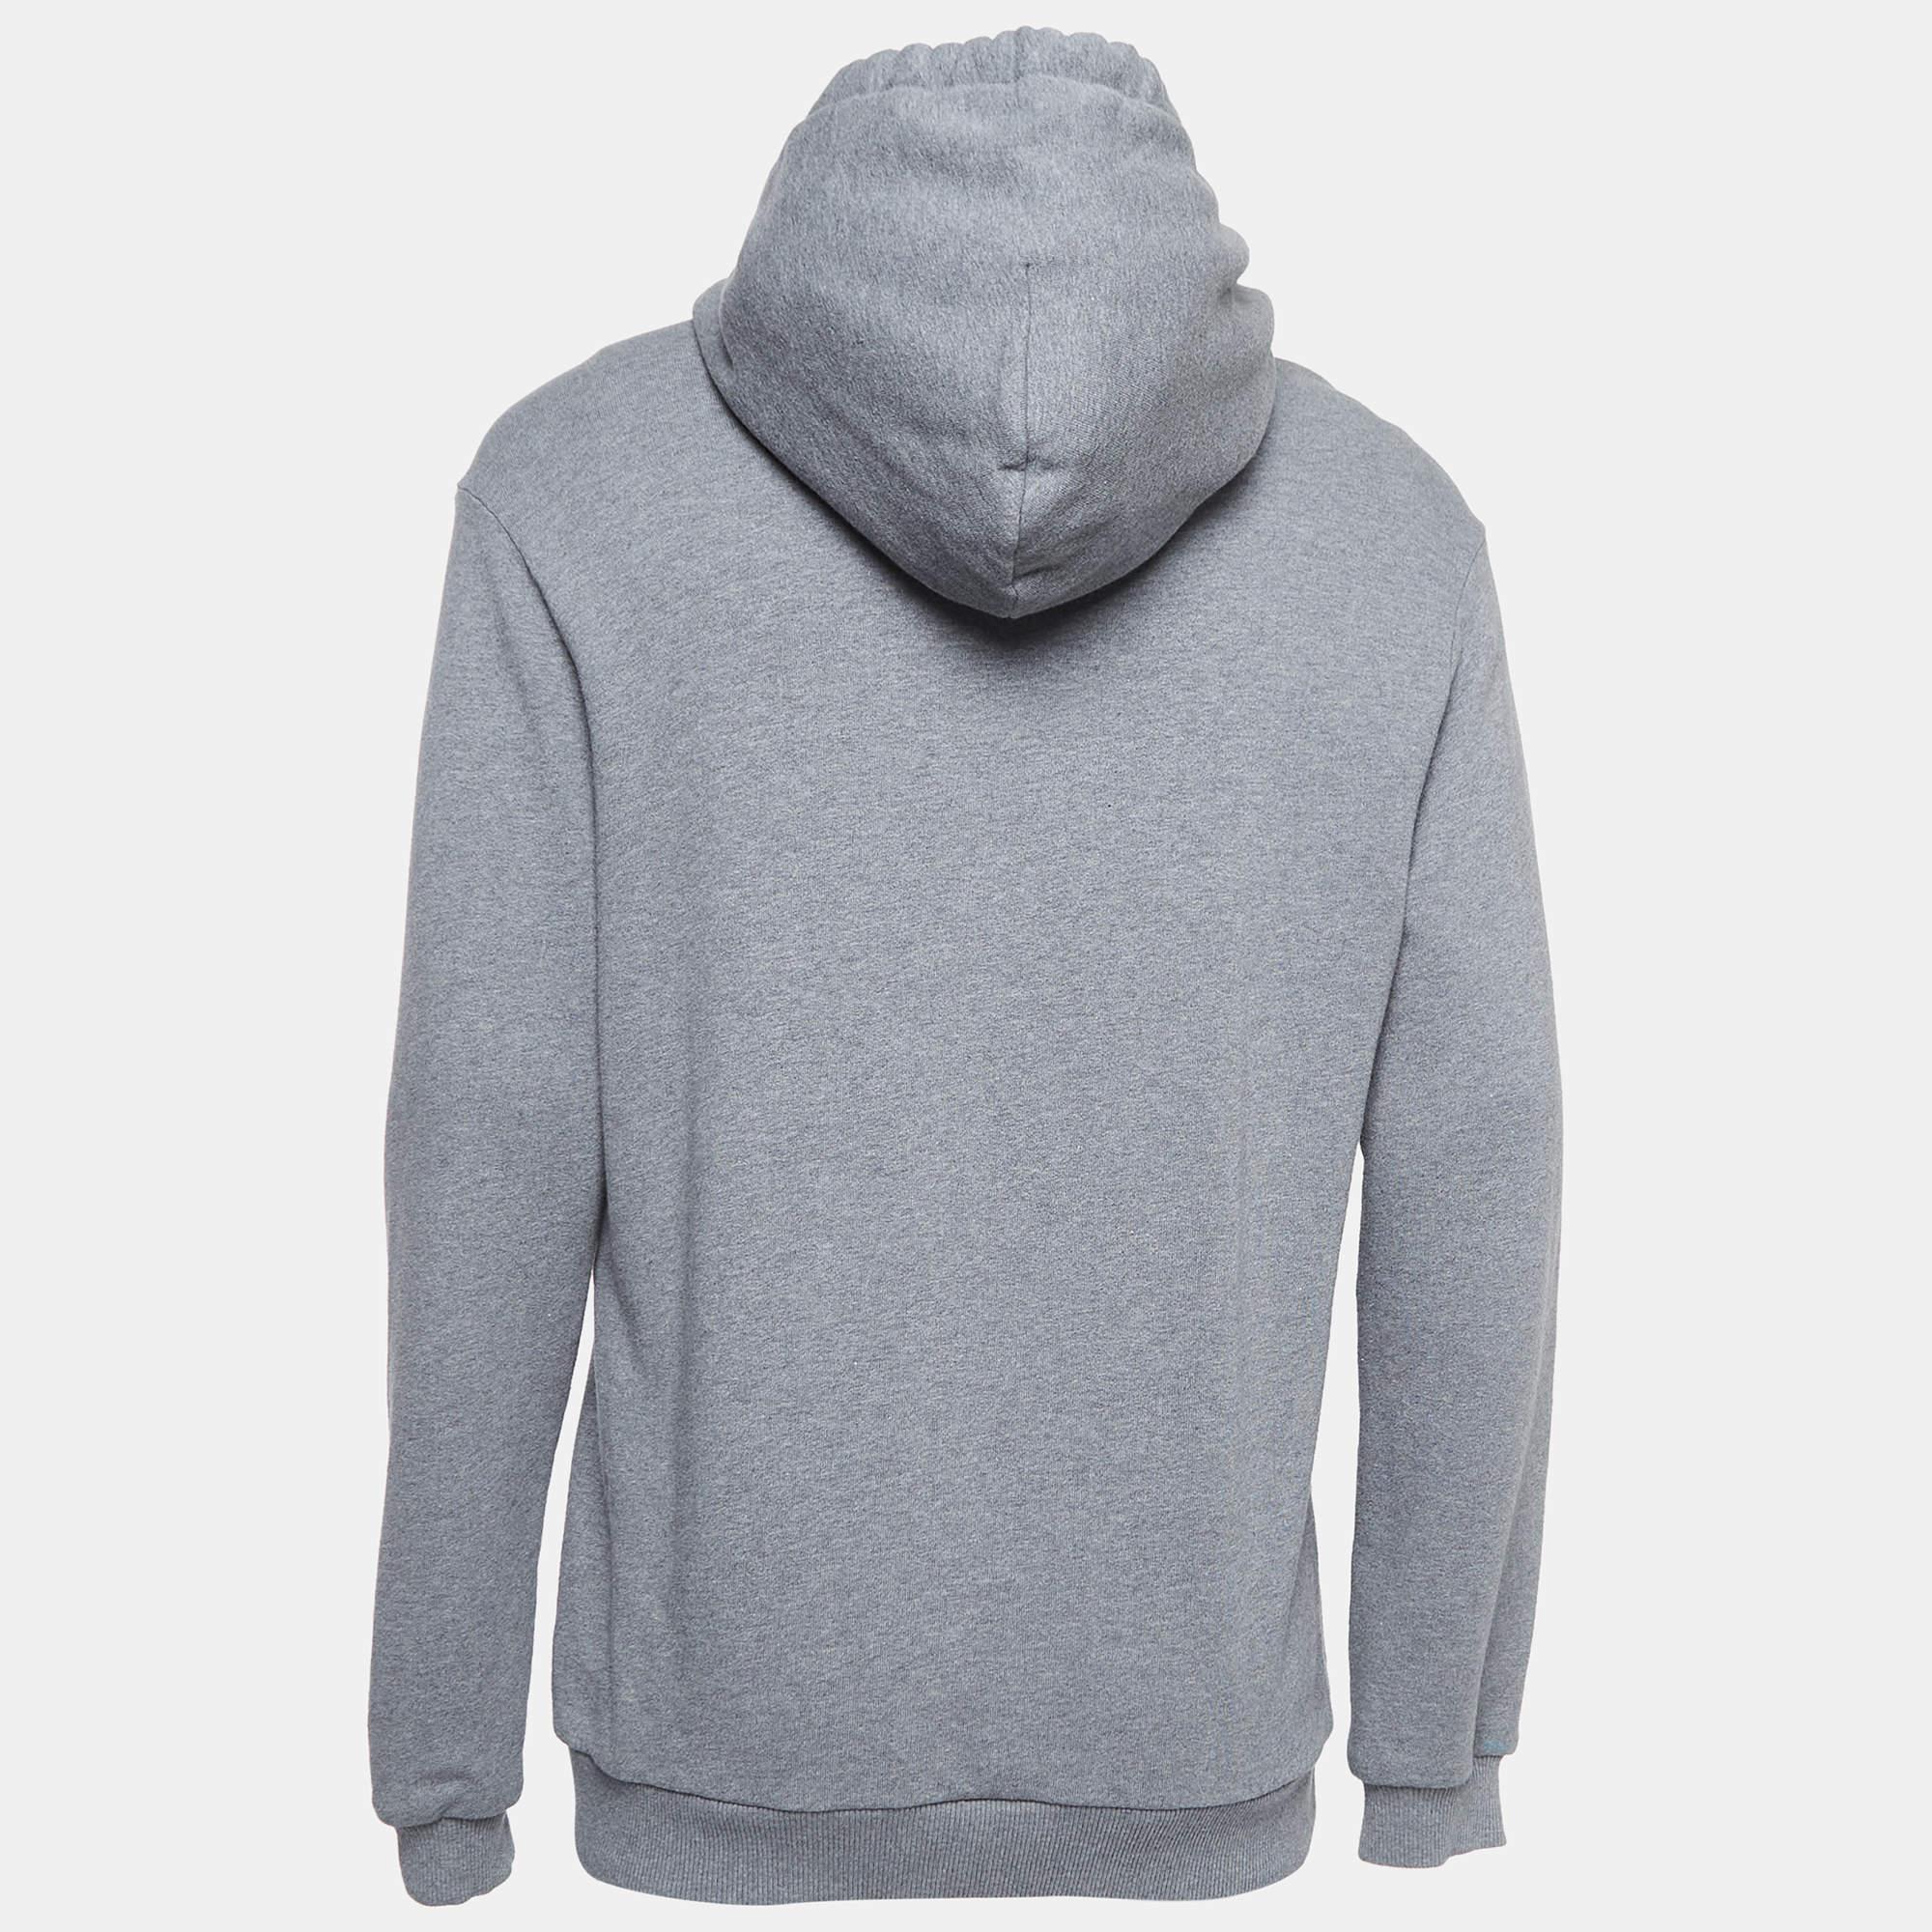 This hoodie is all about sporting a classy and comfy style. It is tailored from soft fabric, which is highlighted with signature accents.

